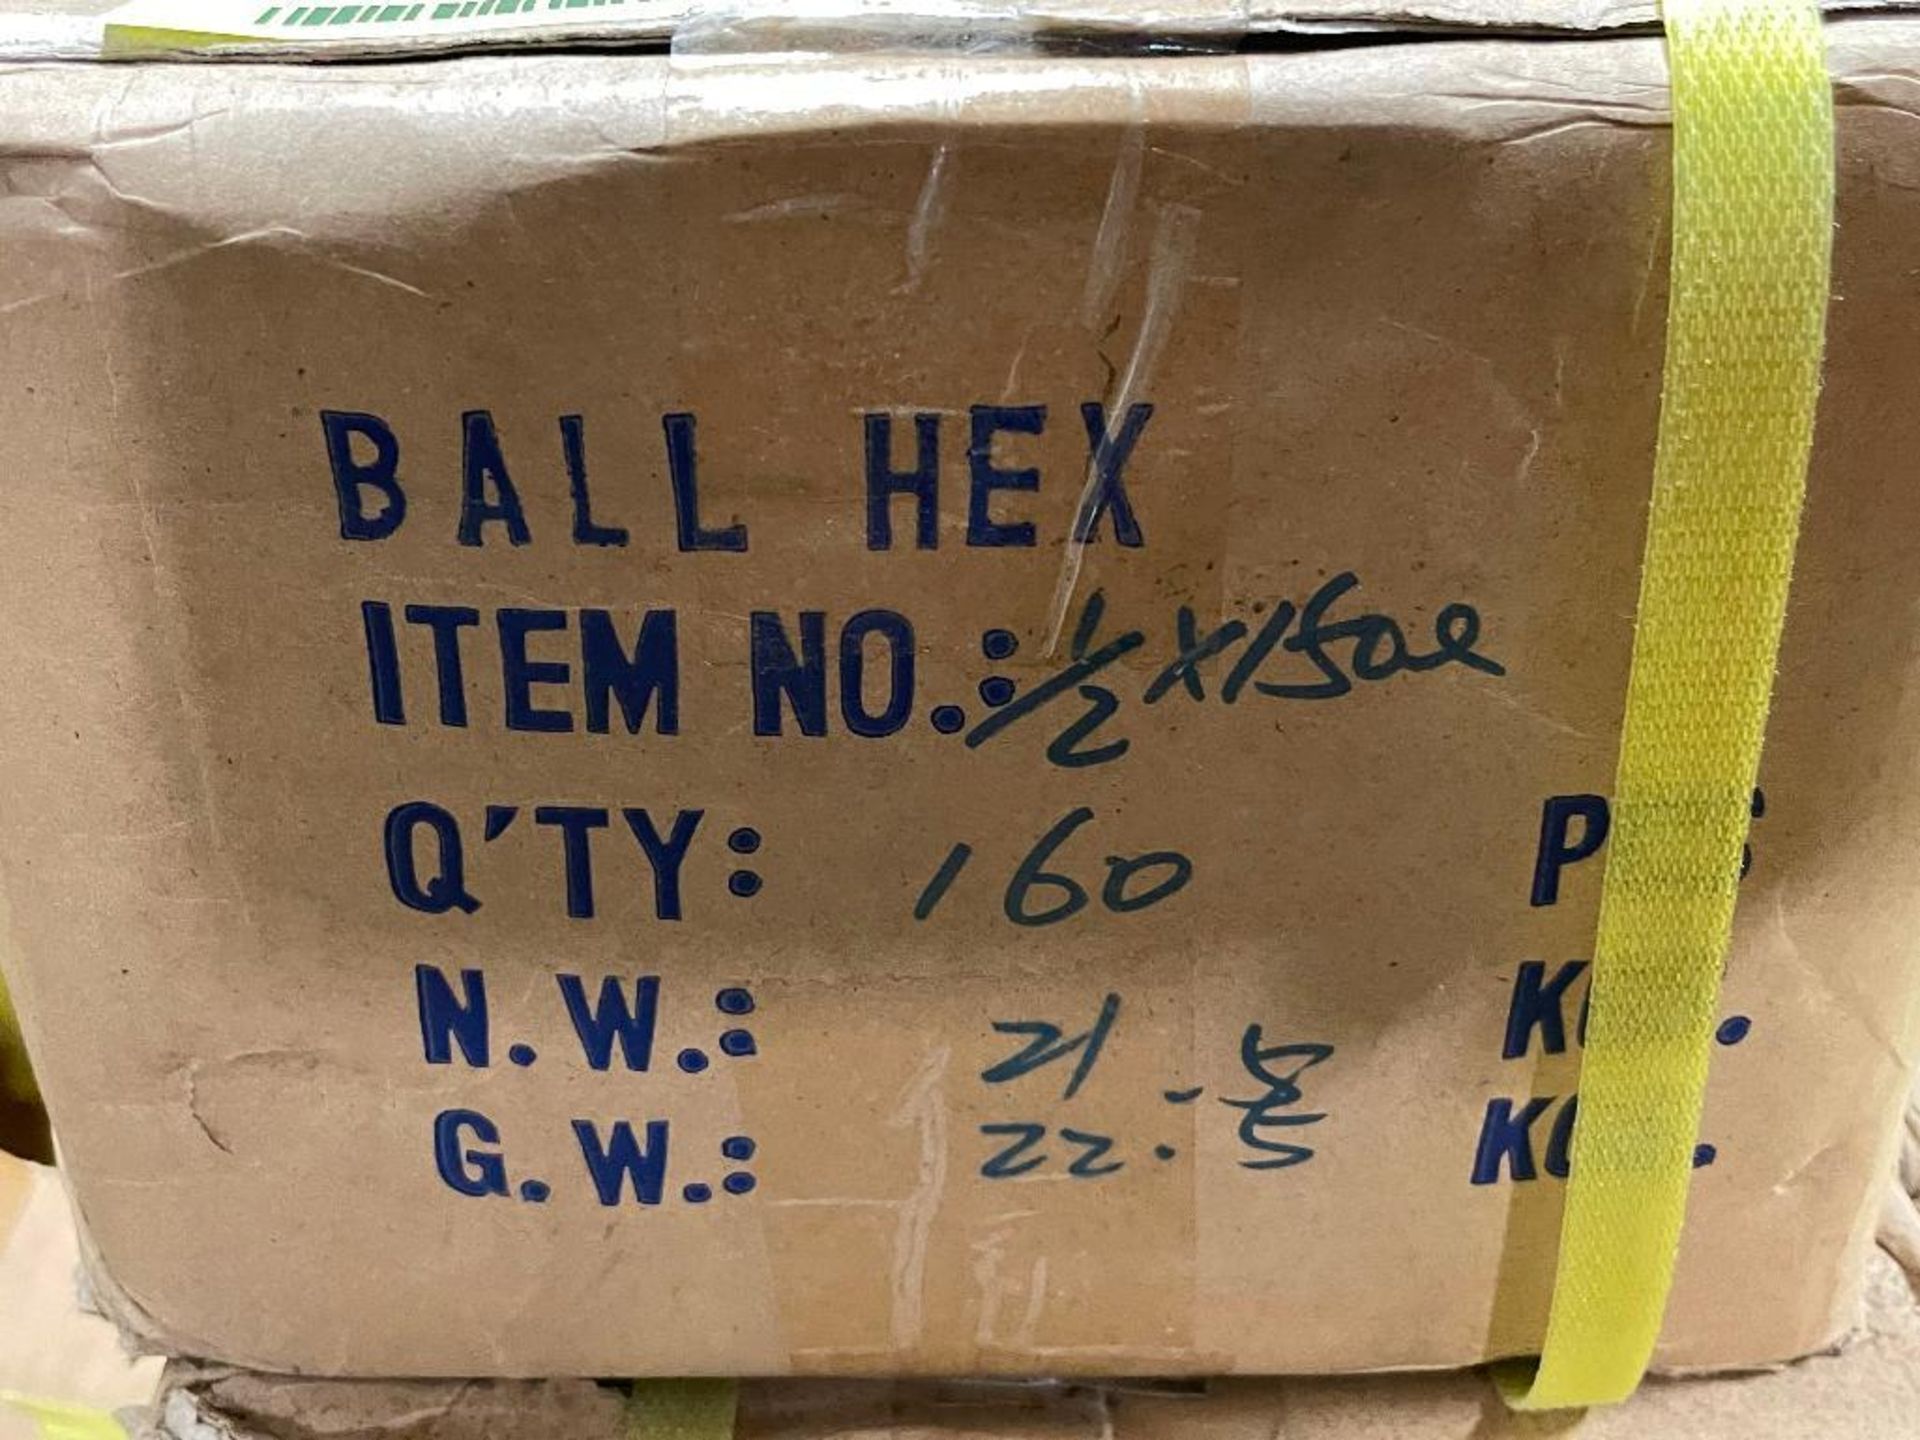 DESCRIPTION: (4) CASES OF 1/2 X 500 BALL HEX SHANKS. 160 IN BOX, 640 IN LOT ADDITIONAL INFORMATION R - Image 3 of 3